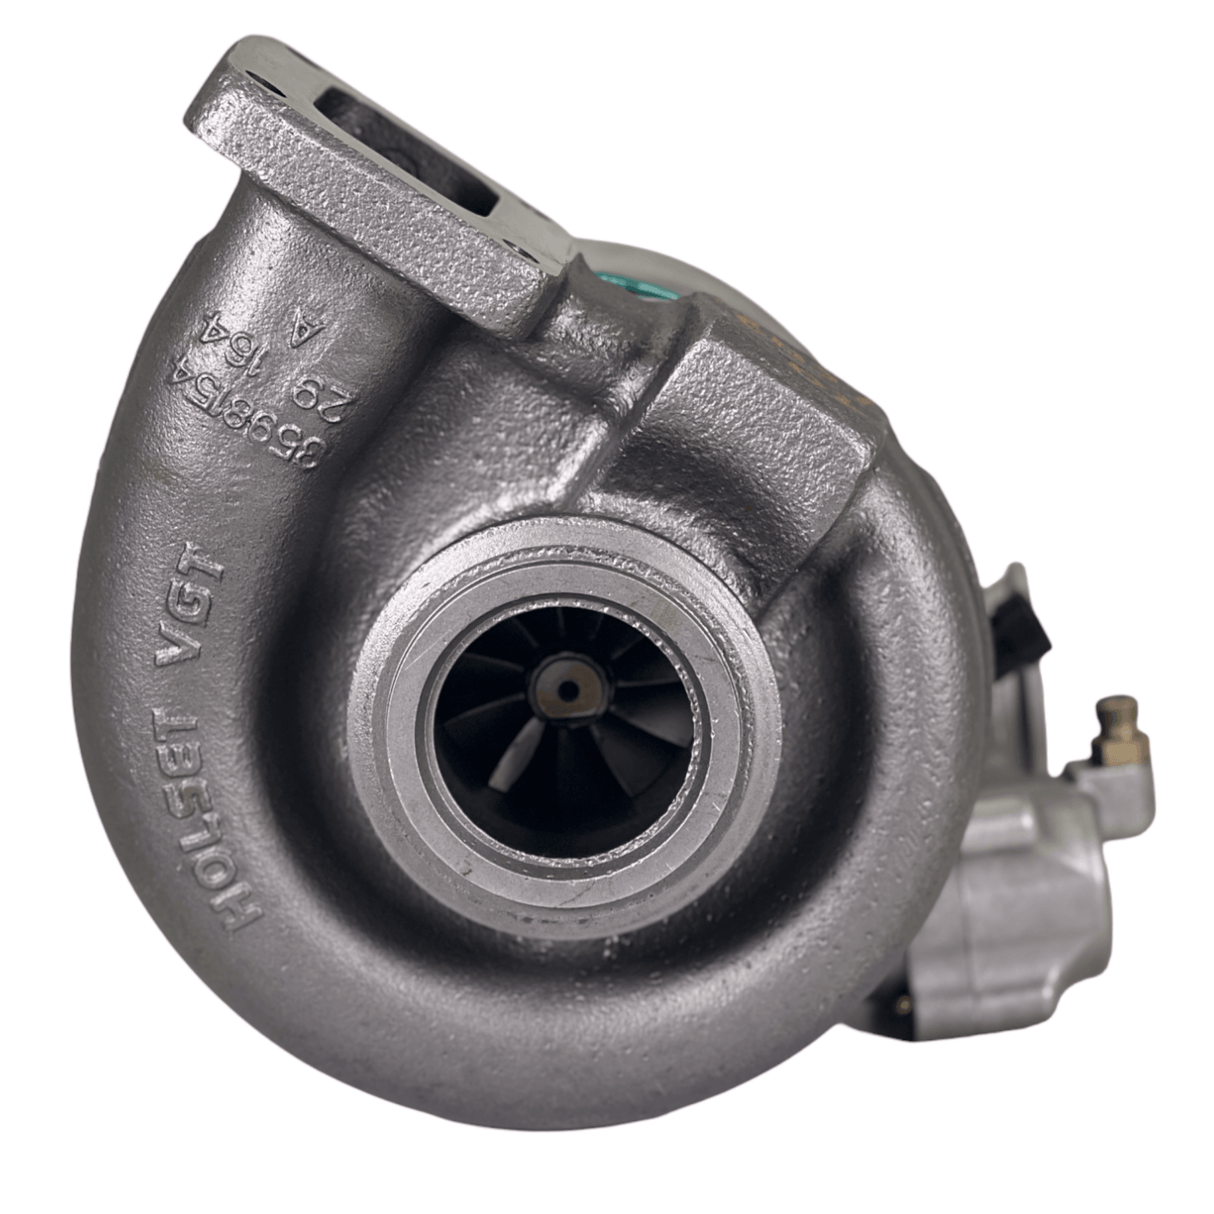 4955462Rx 4955462 Genuine Cummins® Turbocharger He431V For Ism M11 - Truck To Trailer